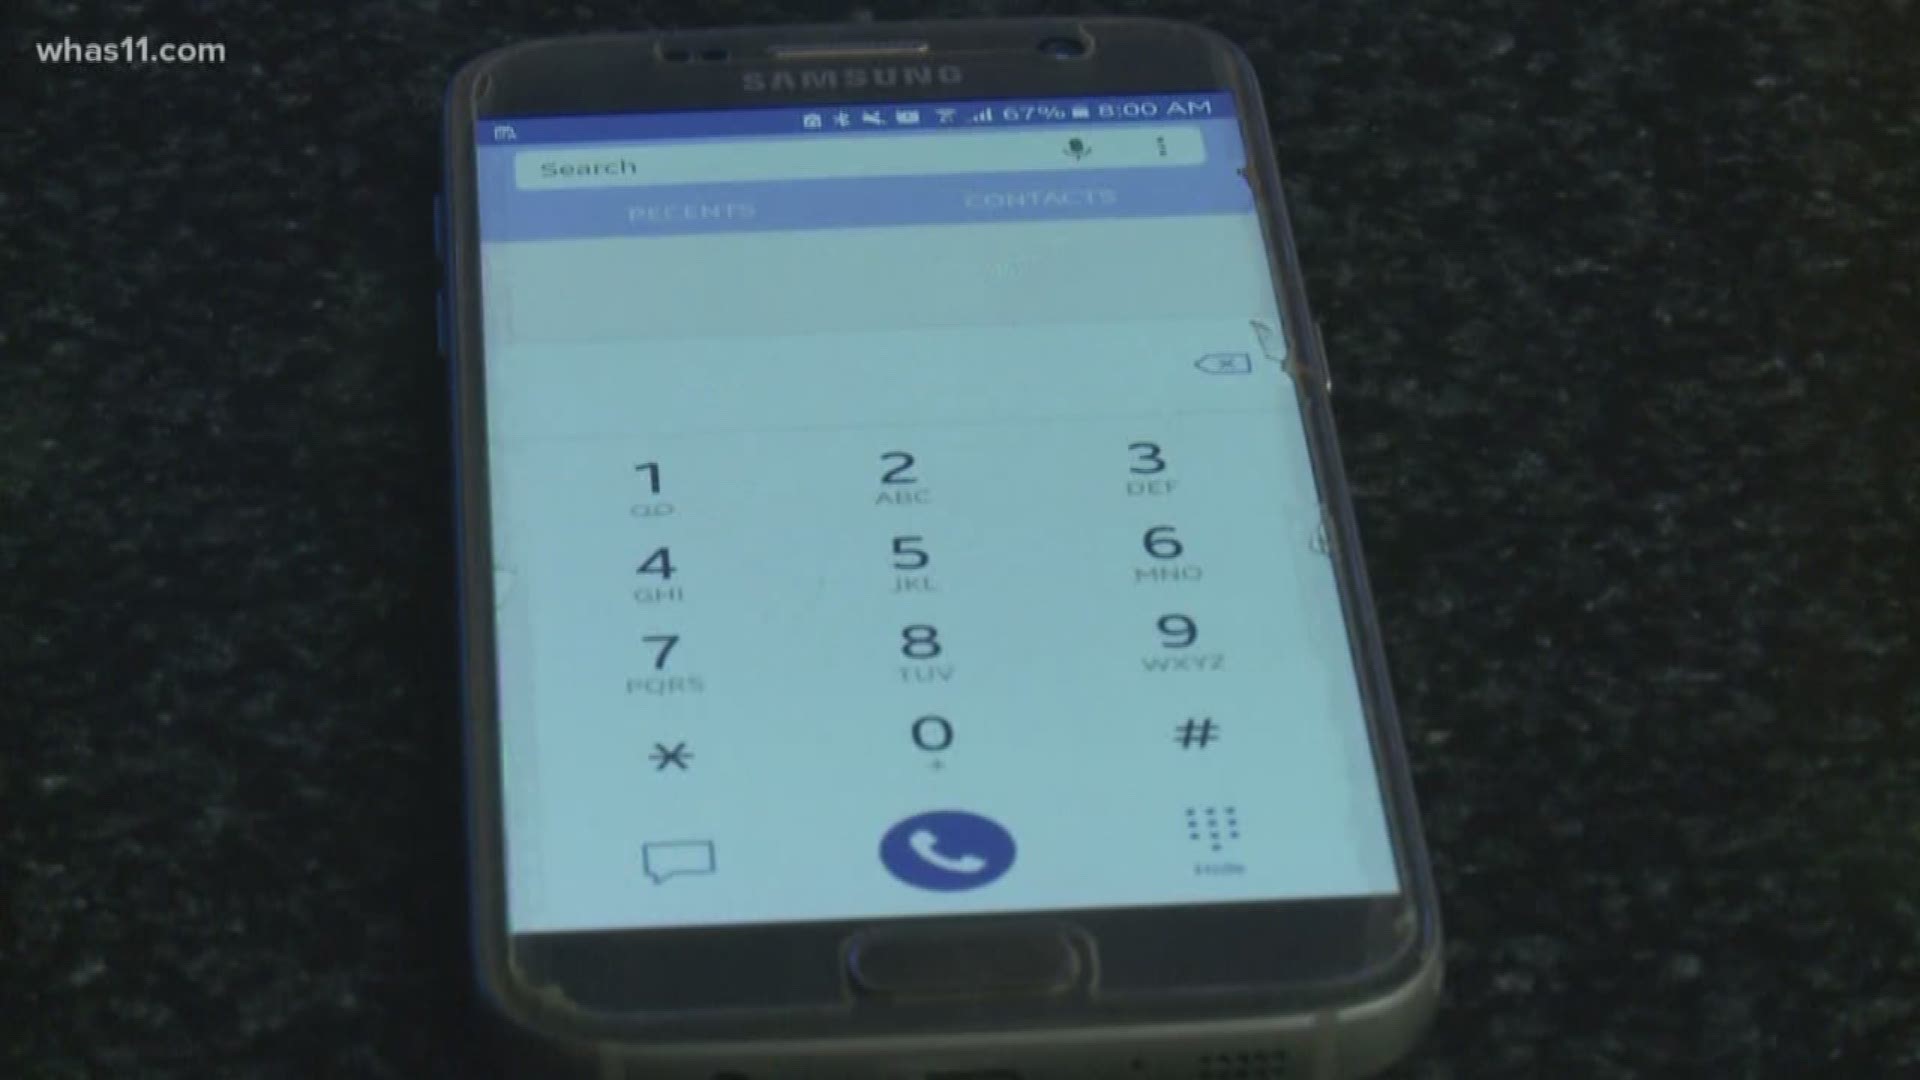 Criminals obtaining your phone number information could lead to more privacy invasions.